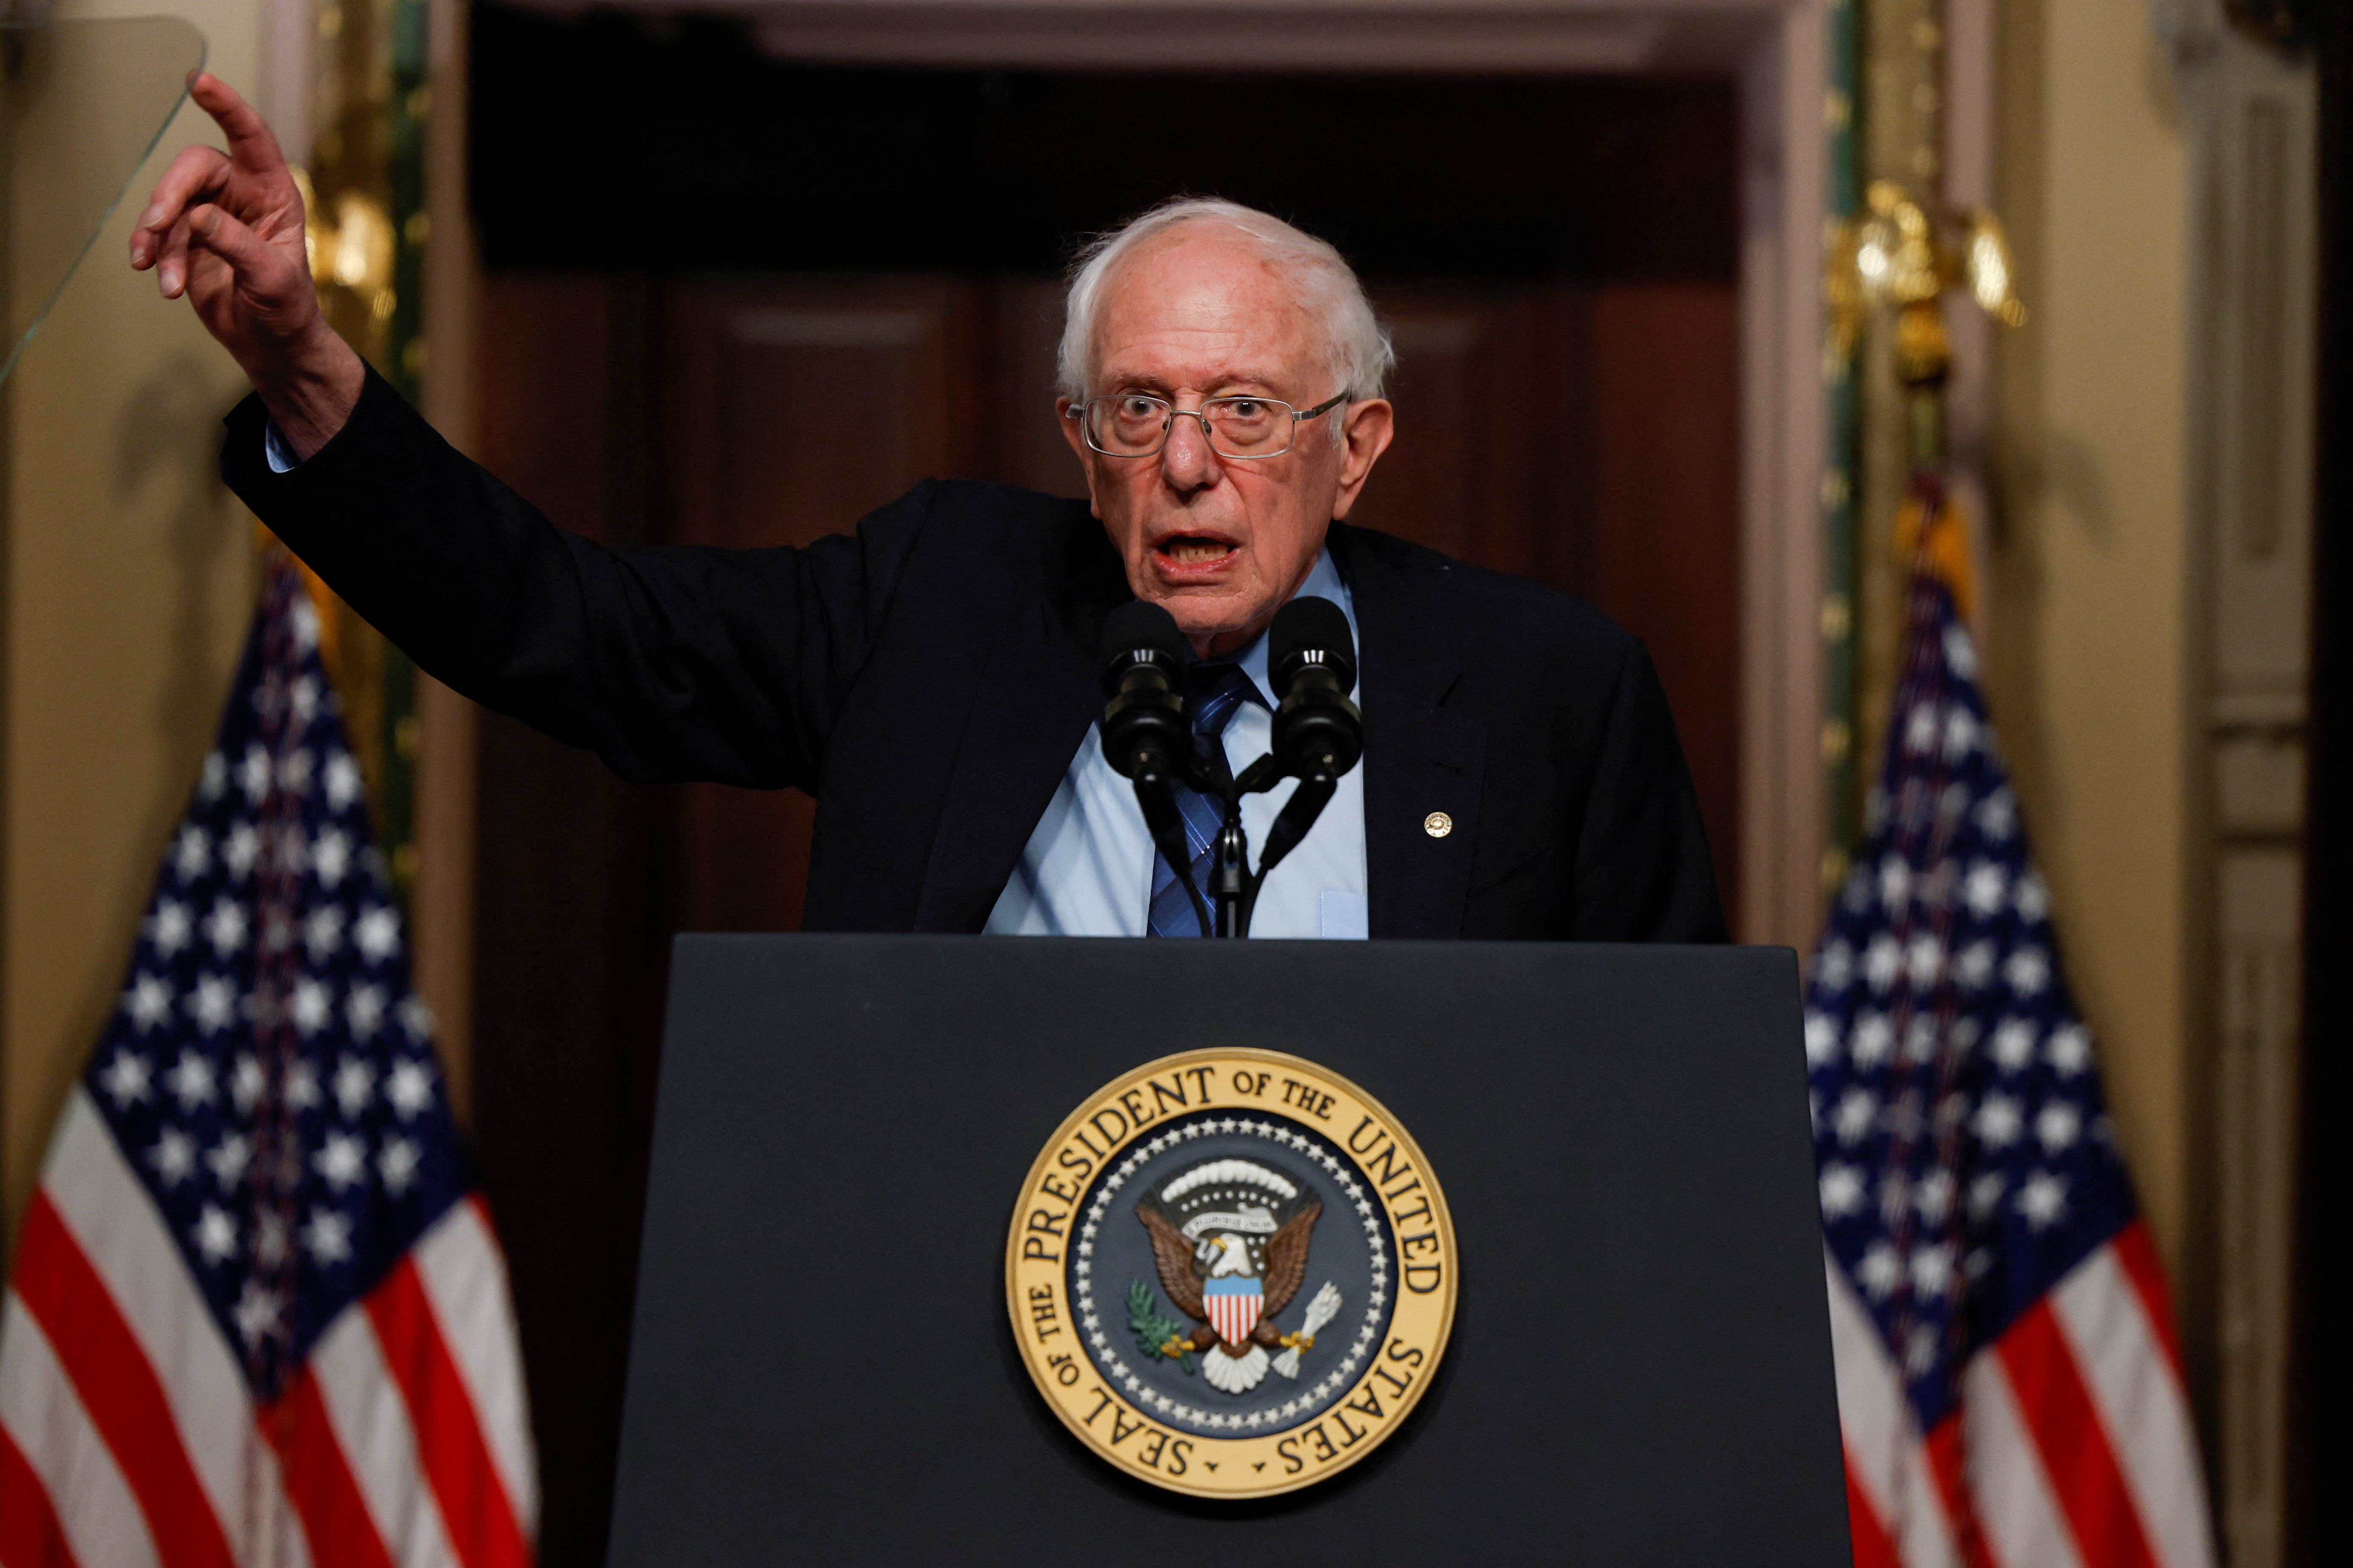 Sanders delivers remarks on lowering healthcare costs in Washington